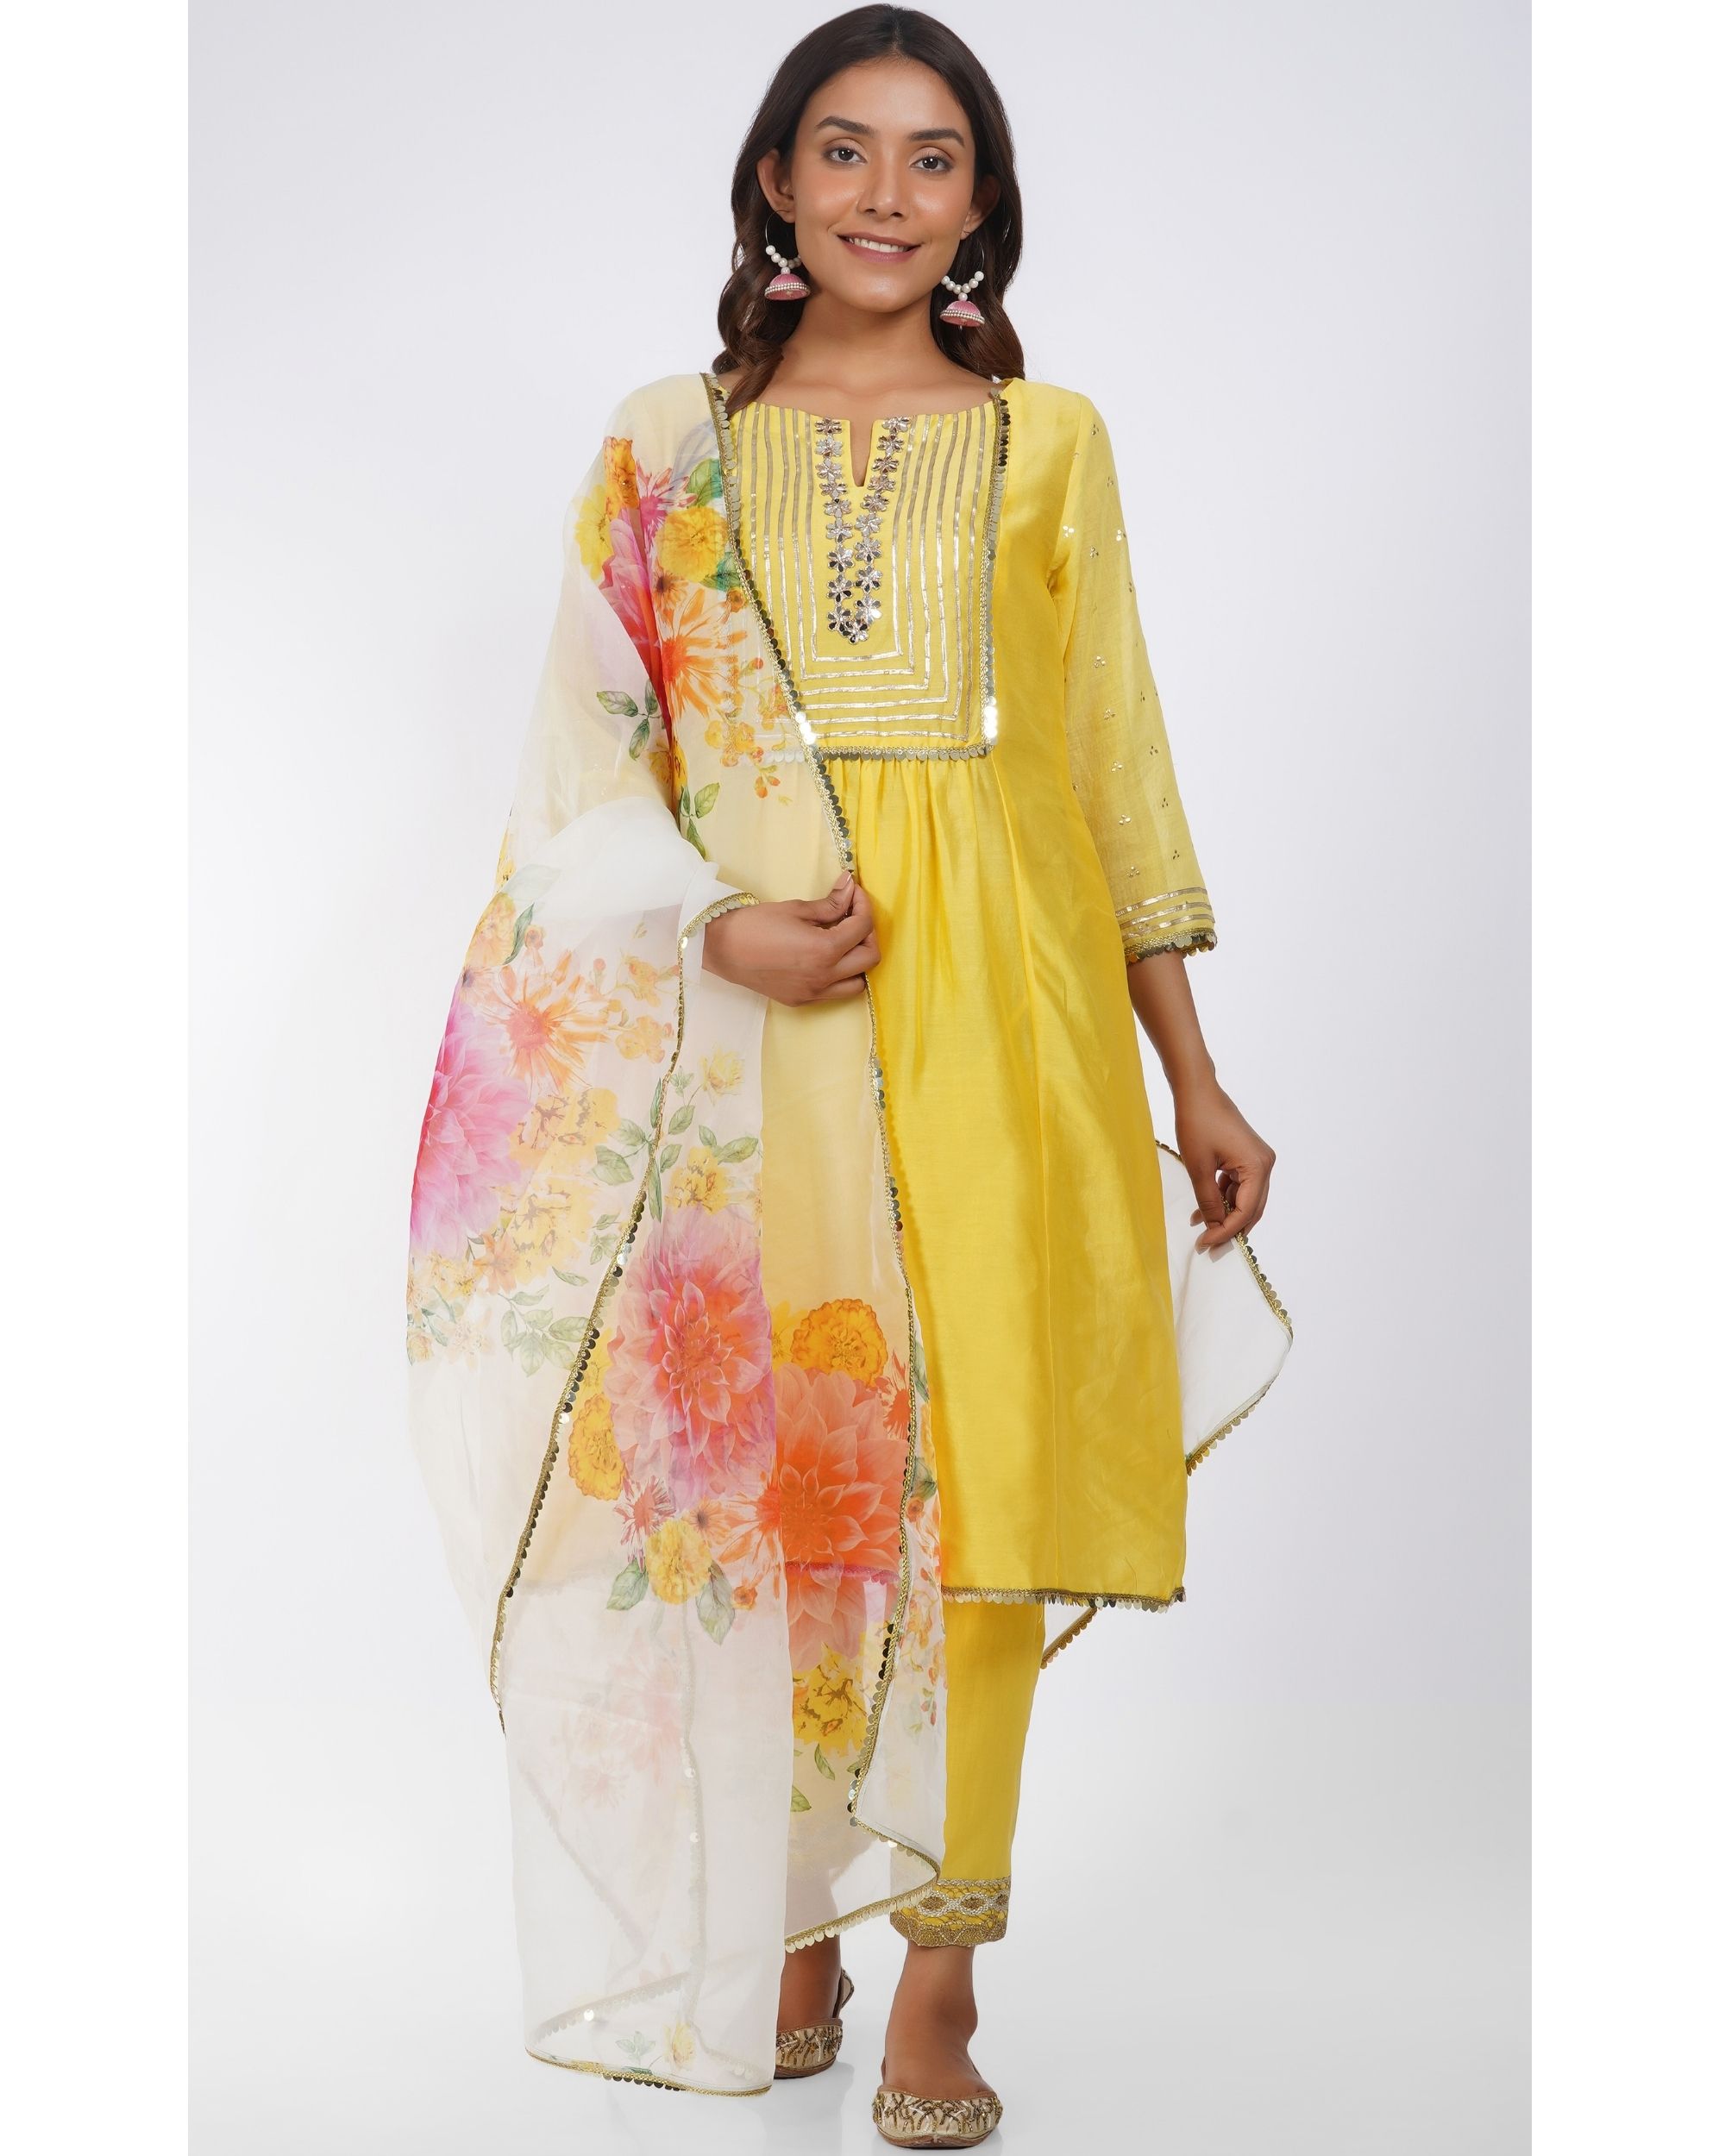 Sunflower yellow lace kurta and pants with organza floral dupatta  - set of three